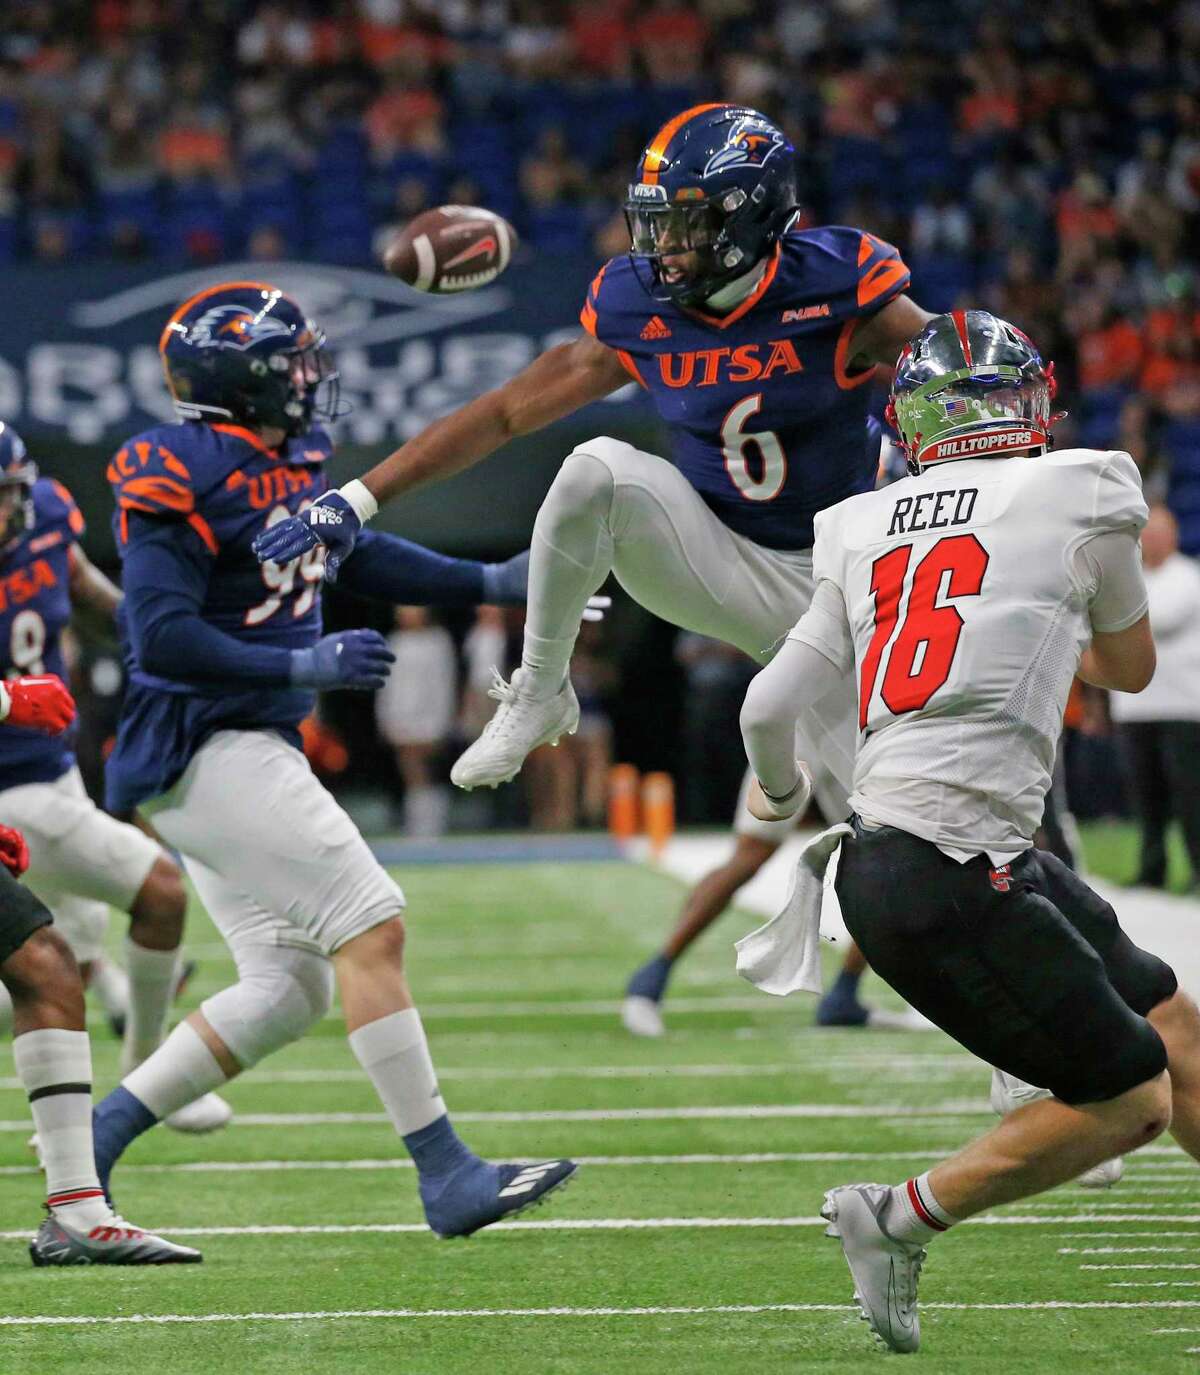 SAN ANTONIO, TX - OCTOBER 08: Safety Kelechi Nwachuku #6 of the UTSA Roadrunners prevents Austin Reed #16 of the Western Kentucky Hilltoppers from competing a pass at the Alamodome on October 08, 2022 in San Antonio, Texas. (Photo by Ronald Cortes/Getty Images)